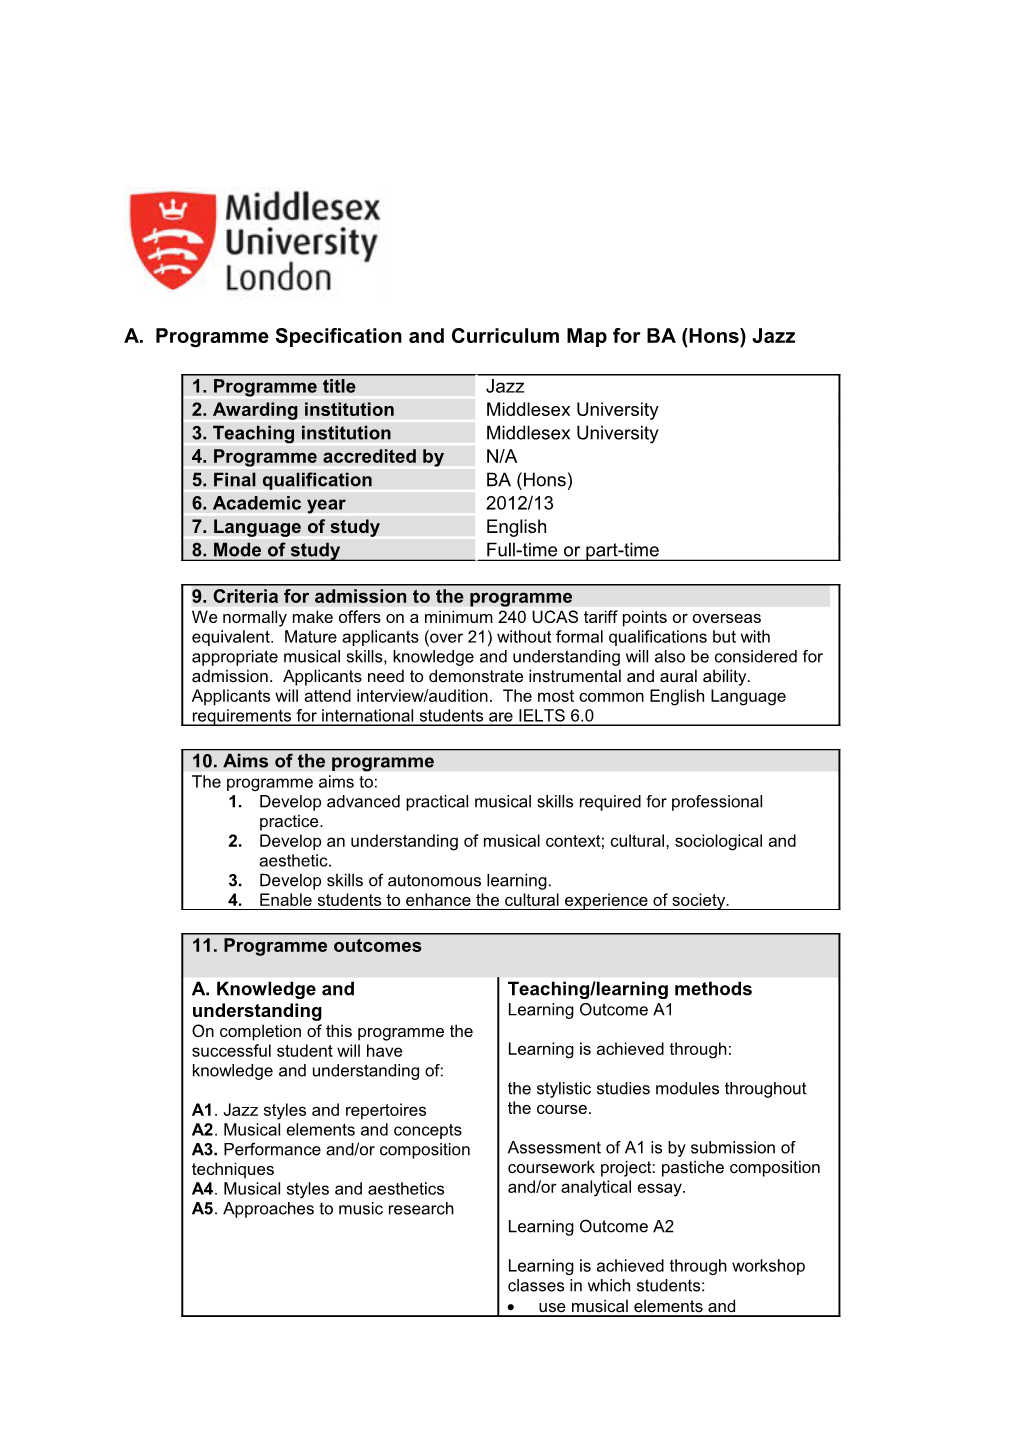 A. Programme Specification and Curriculum Map for BA (Hons) Jazz